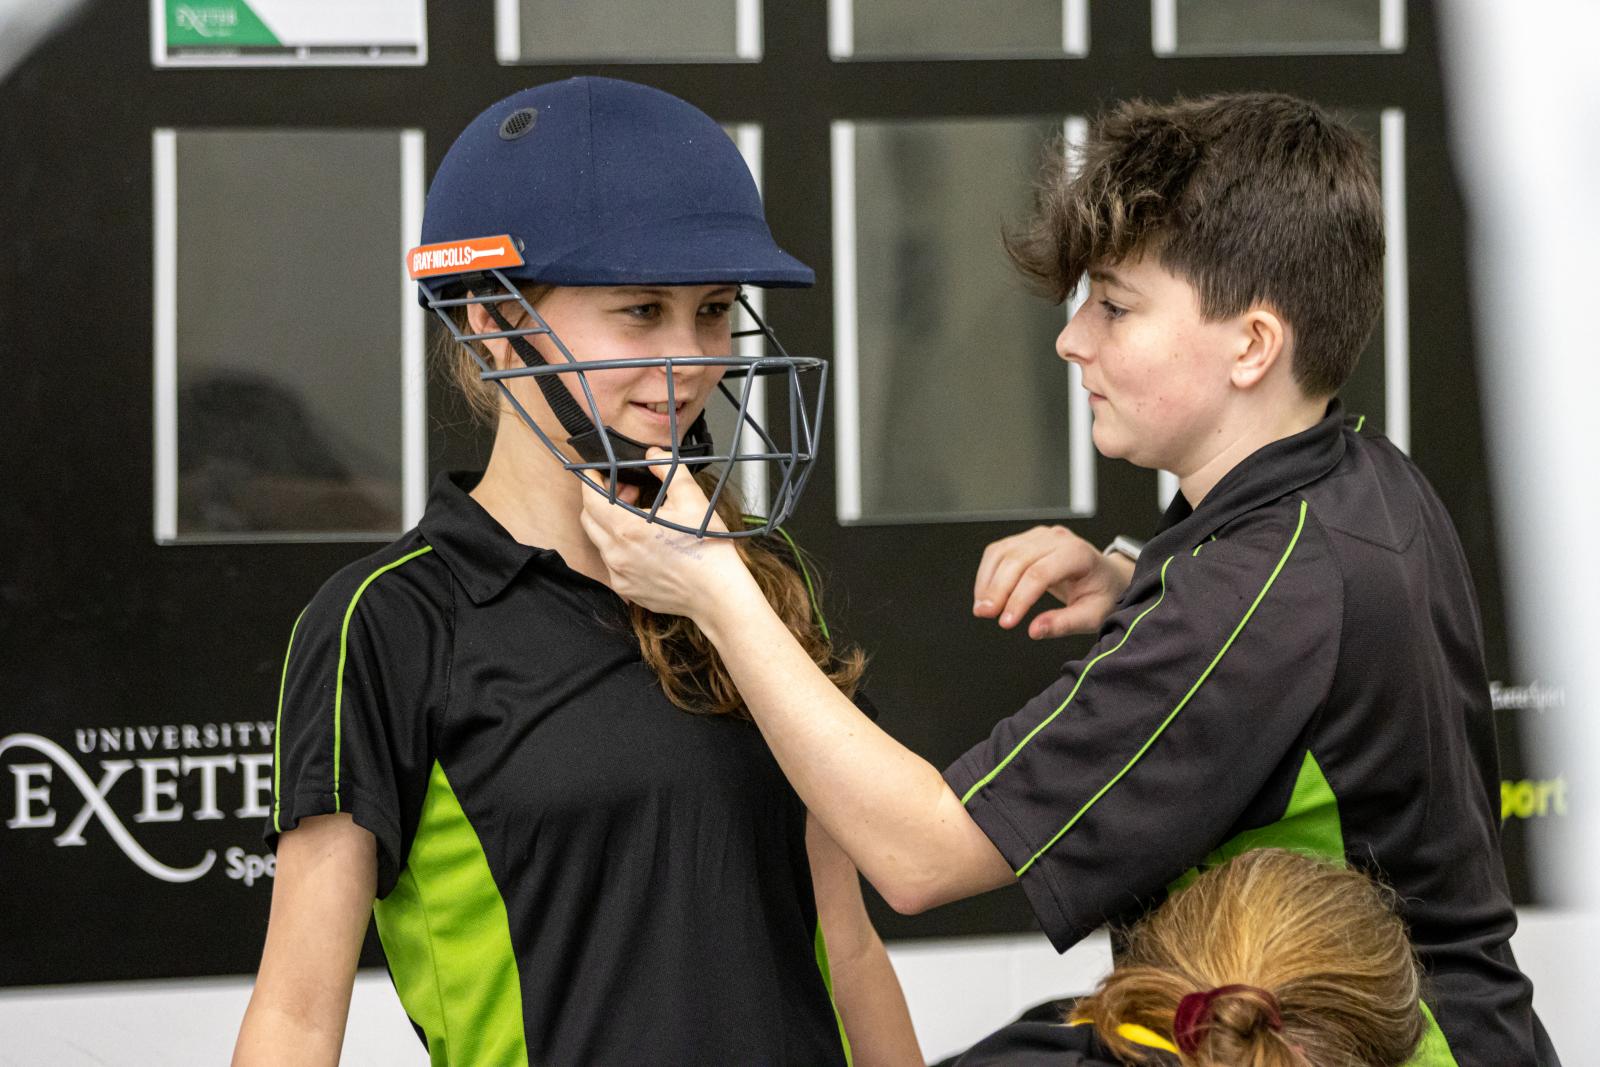 Newton Abbot Young Leader, Libby, helps a participant with putting on the kit for her first go at hardball cricket.